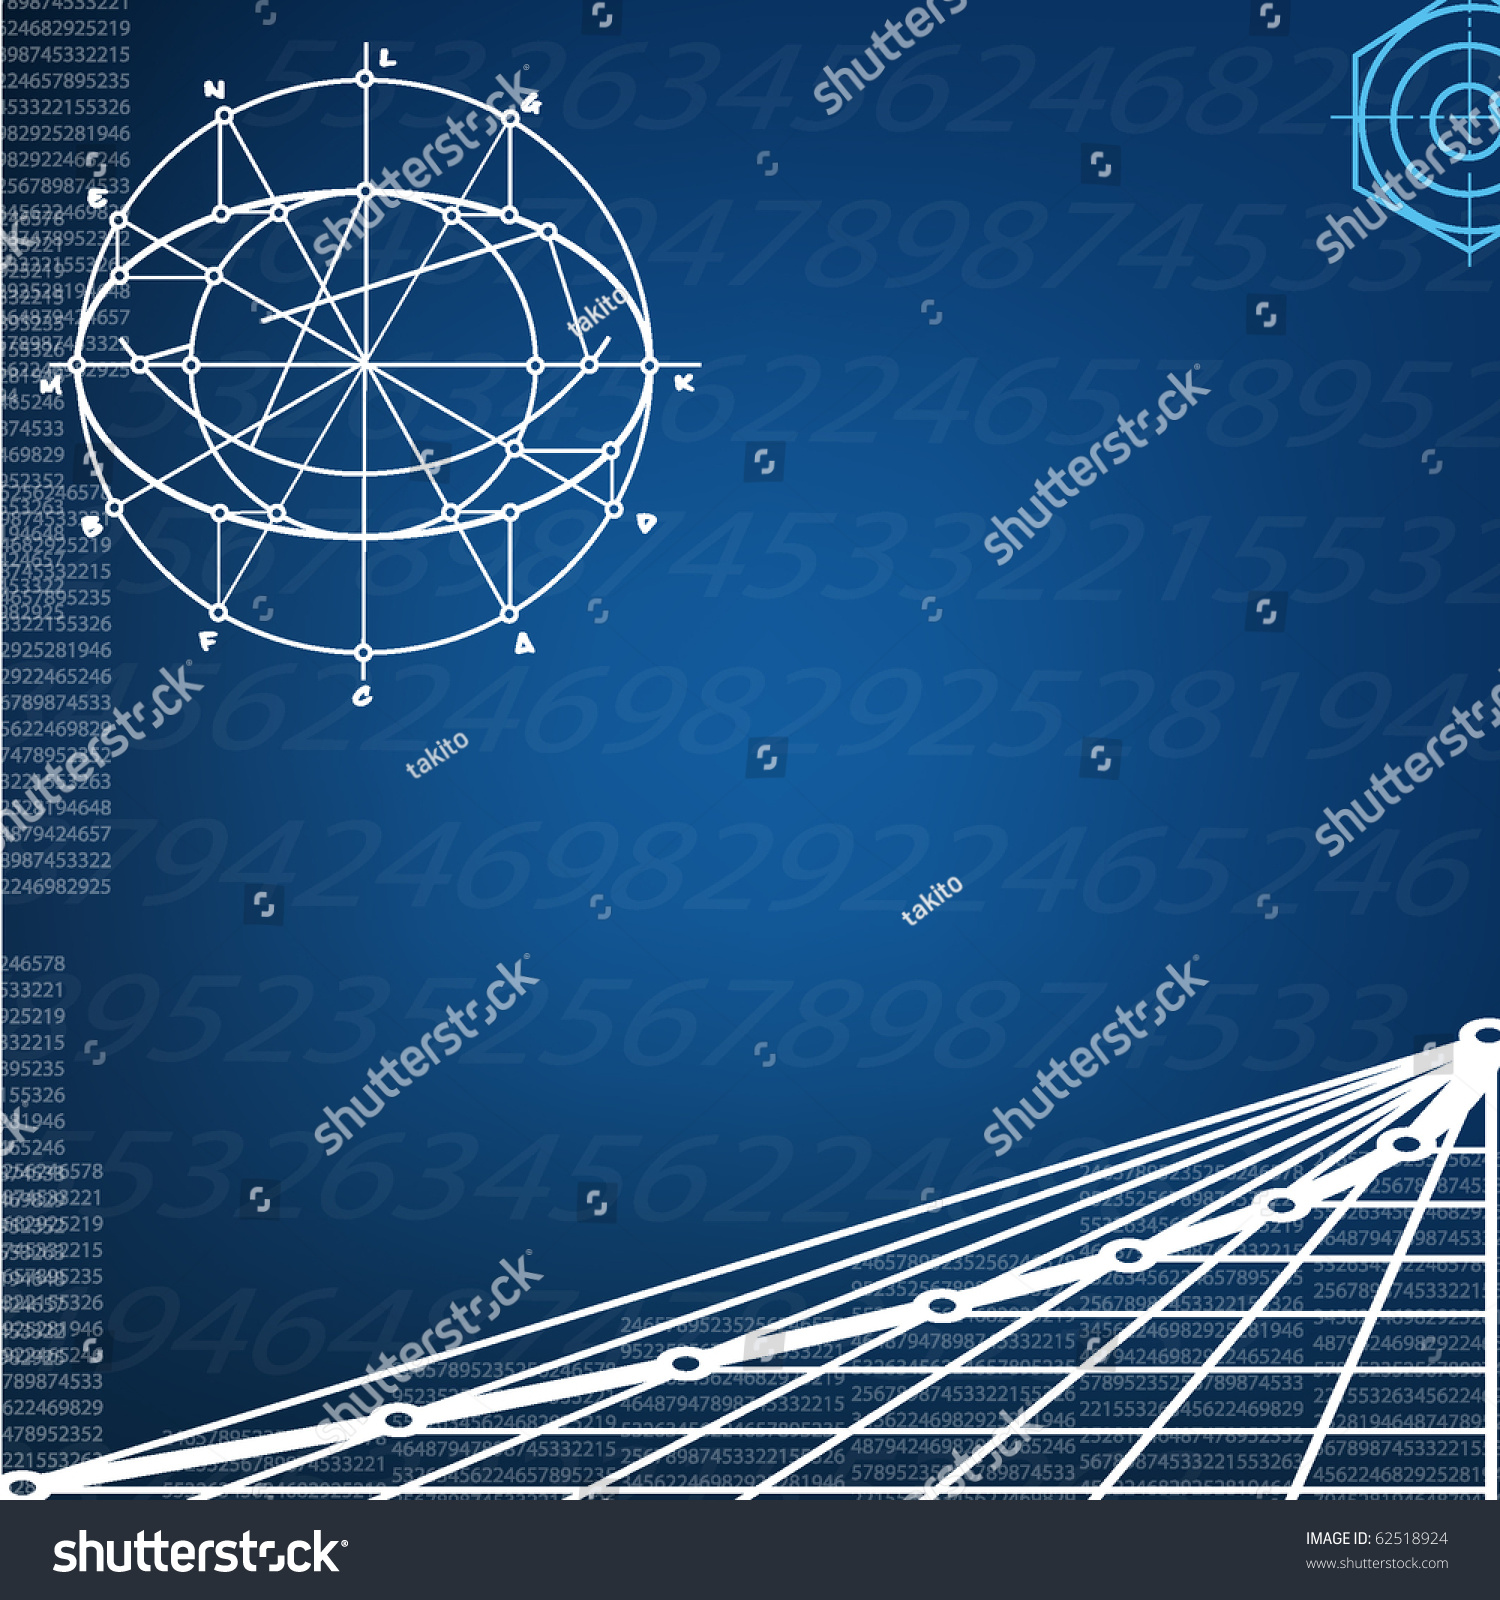 Abstract Techno Background. Vector. Eps10 - 62518924 : Shutterstock